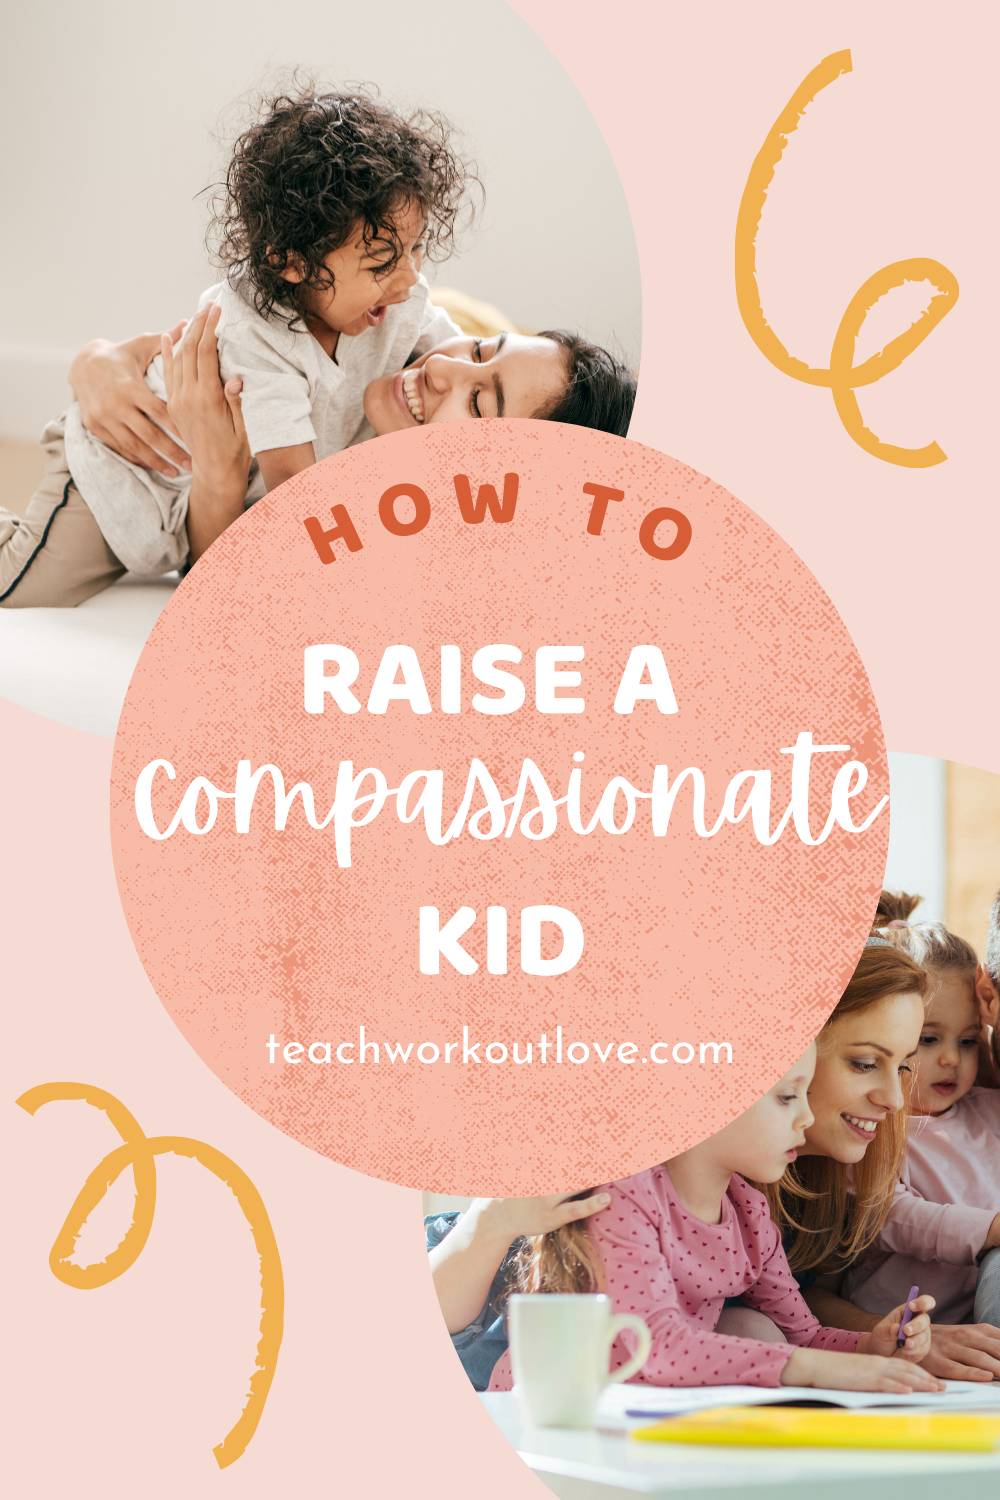 While you can’t control what happens in your kid’s head, you can emphasize qualities that are part of a compassionate society. In this article, here are three tips parents can use to raise compassionate children.